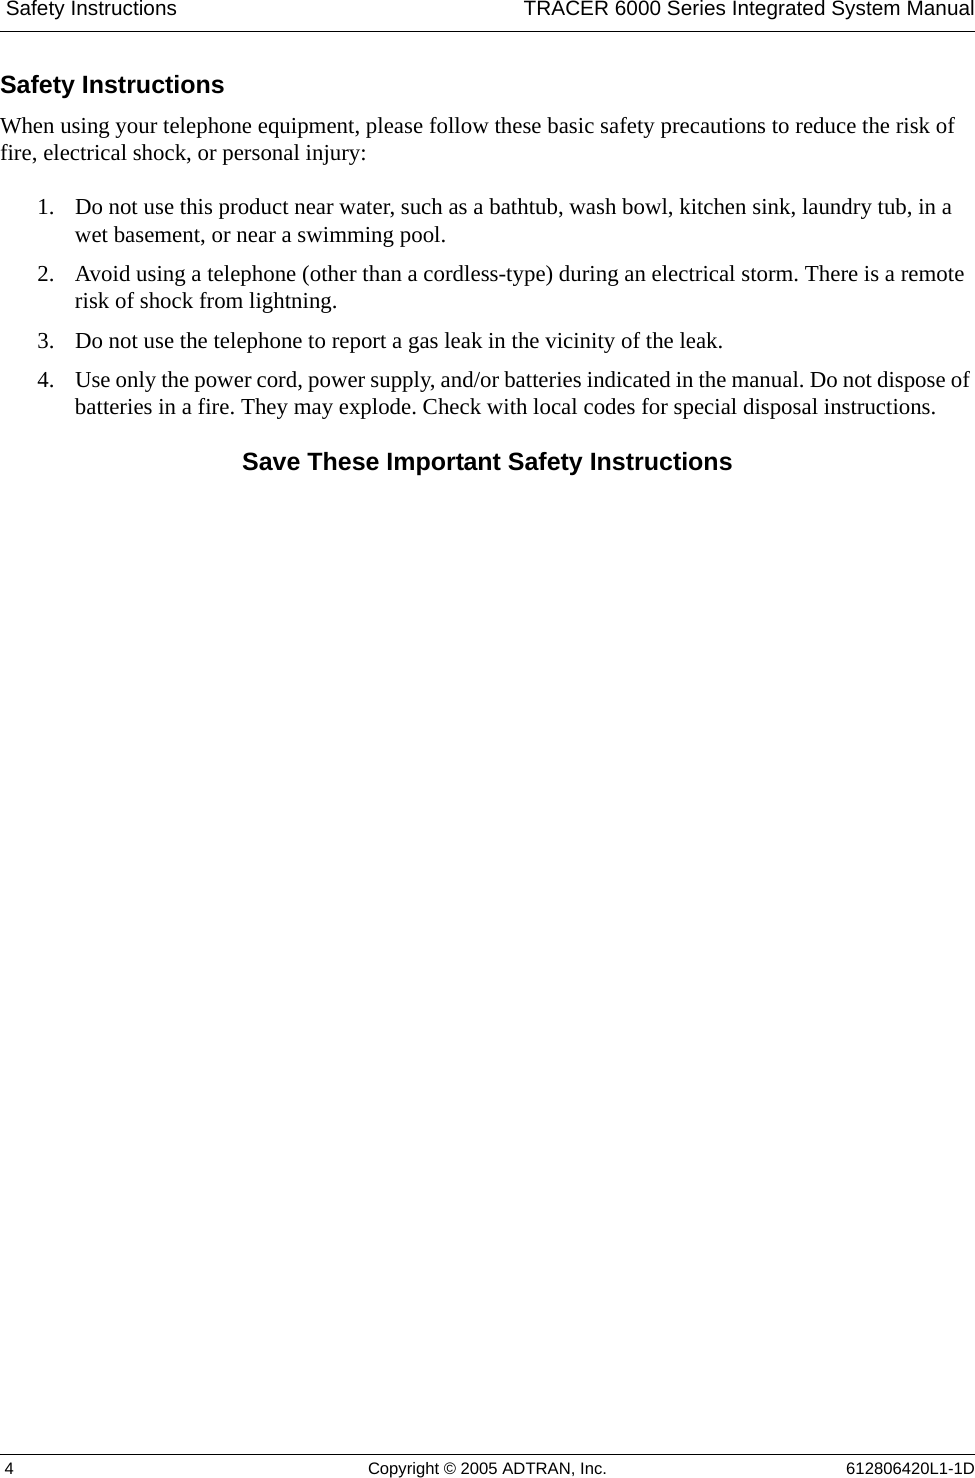  Safety Instructions TRACER 6000 Series Integrated System Manual 4 Copyright © 2005 ADTRAN, Inc. 612806420L1-1DSafety InstructionsWhen using your telephone equipment, please follow these basic safety precautions to reduce the risk of fire, electrical shock, or personal injury:1. Do not use this product near water, such as a bathtub, wash bowl, kitchen sink, laundry tub, in a wet basement, or near a swimming pool.2. Avoid using a telephone (other than a cordless-type) during an electrical storm. There is a remote risk of shock from lightning.3. Do not use the telephone to report a gas leak in the vicinity of the leak.4. Use only the power cord, power supply, and/or batteries indicated in the manual. Do not dispose of batteries in a fire. They may explode. Check with local codes for special disposal instructions.Save These Important Safety Instructions